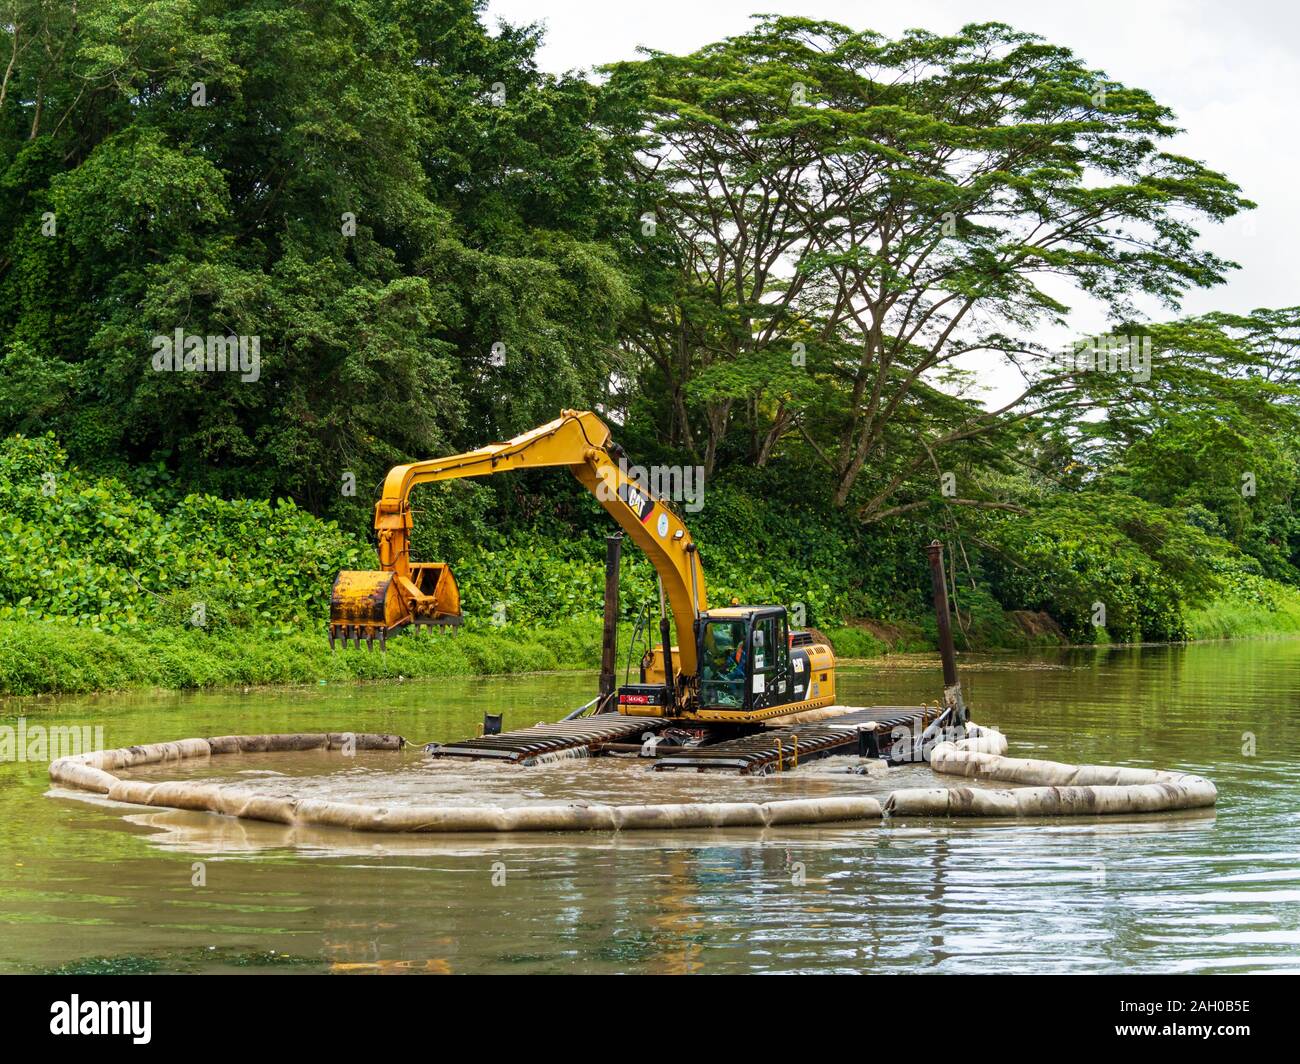 A yellow excavator / bulldozer performing dredging work in a canal / river in a scenic tropical rainforest / jungle habitat in Singapore, South-East A Stock Photo